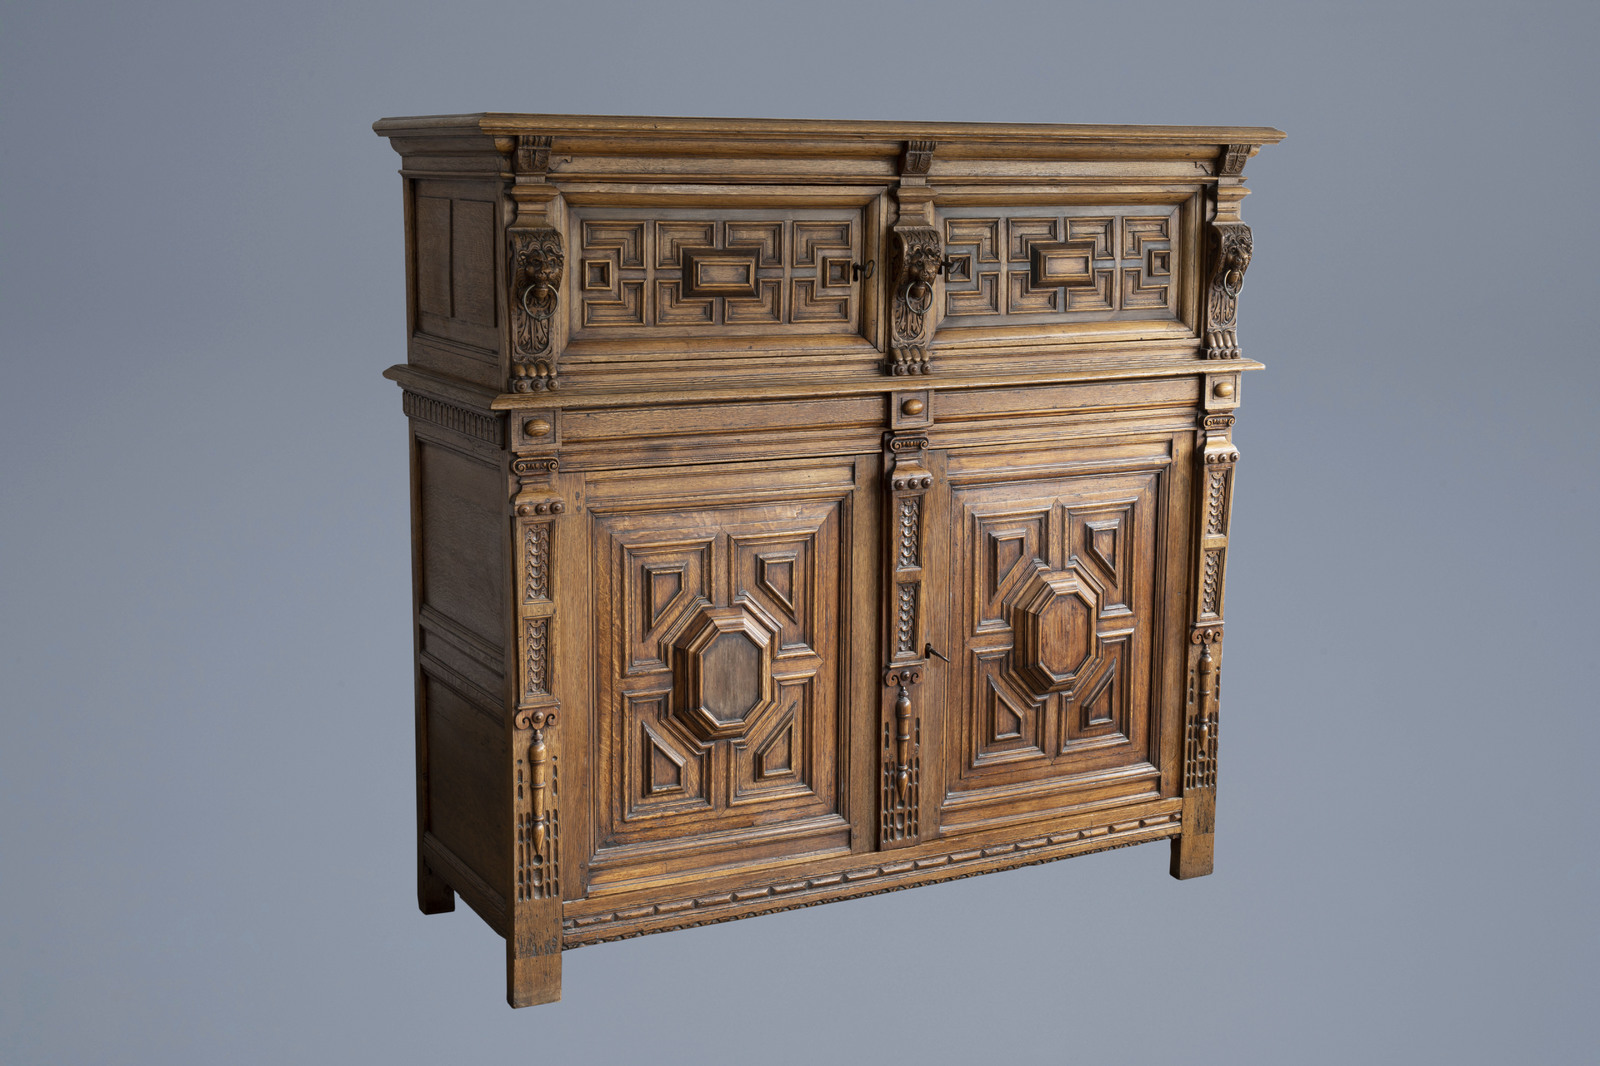 A Dutch wooden cupboard 'Zeeuwse kast' with geometric pattern and flanked by lions, 18th C.